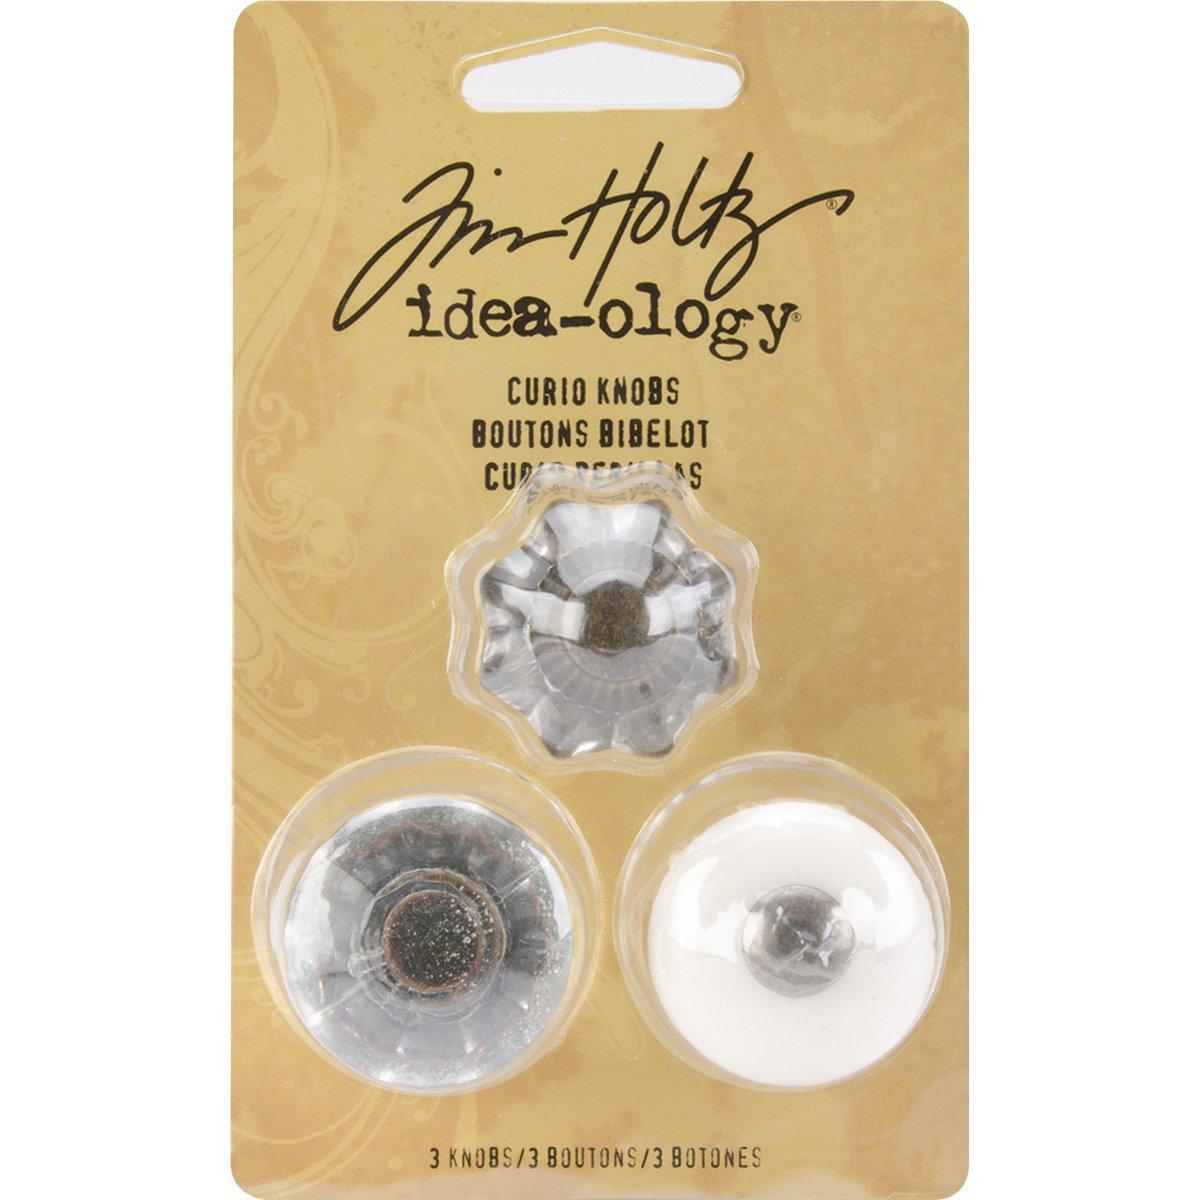 Tim Holtz Idea-ology curio knobs by tim holtz idea-ology, 3 per pack, 1 x 7/8 inches, white and clear, metal and plastic, th92840